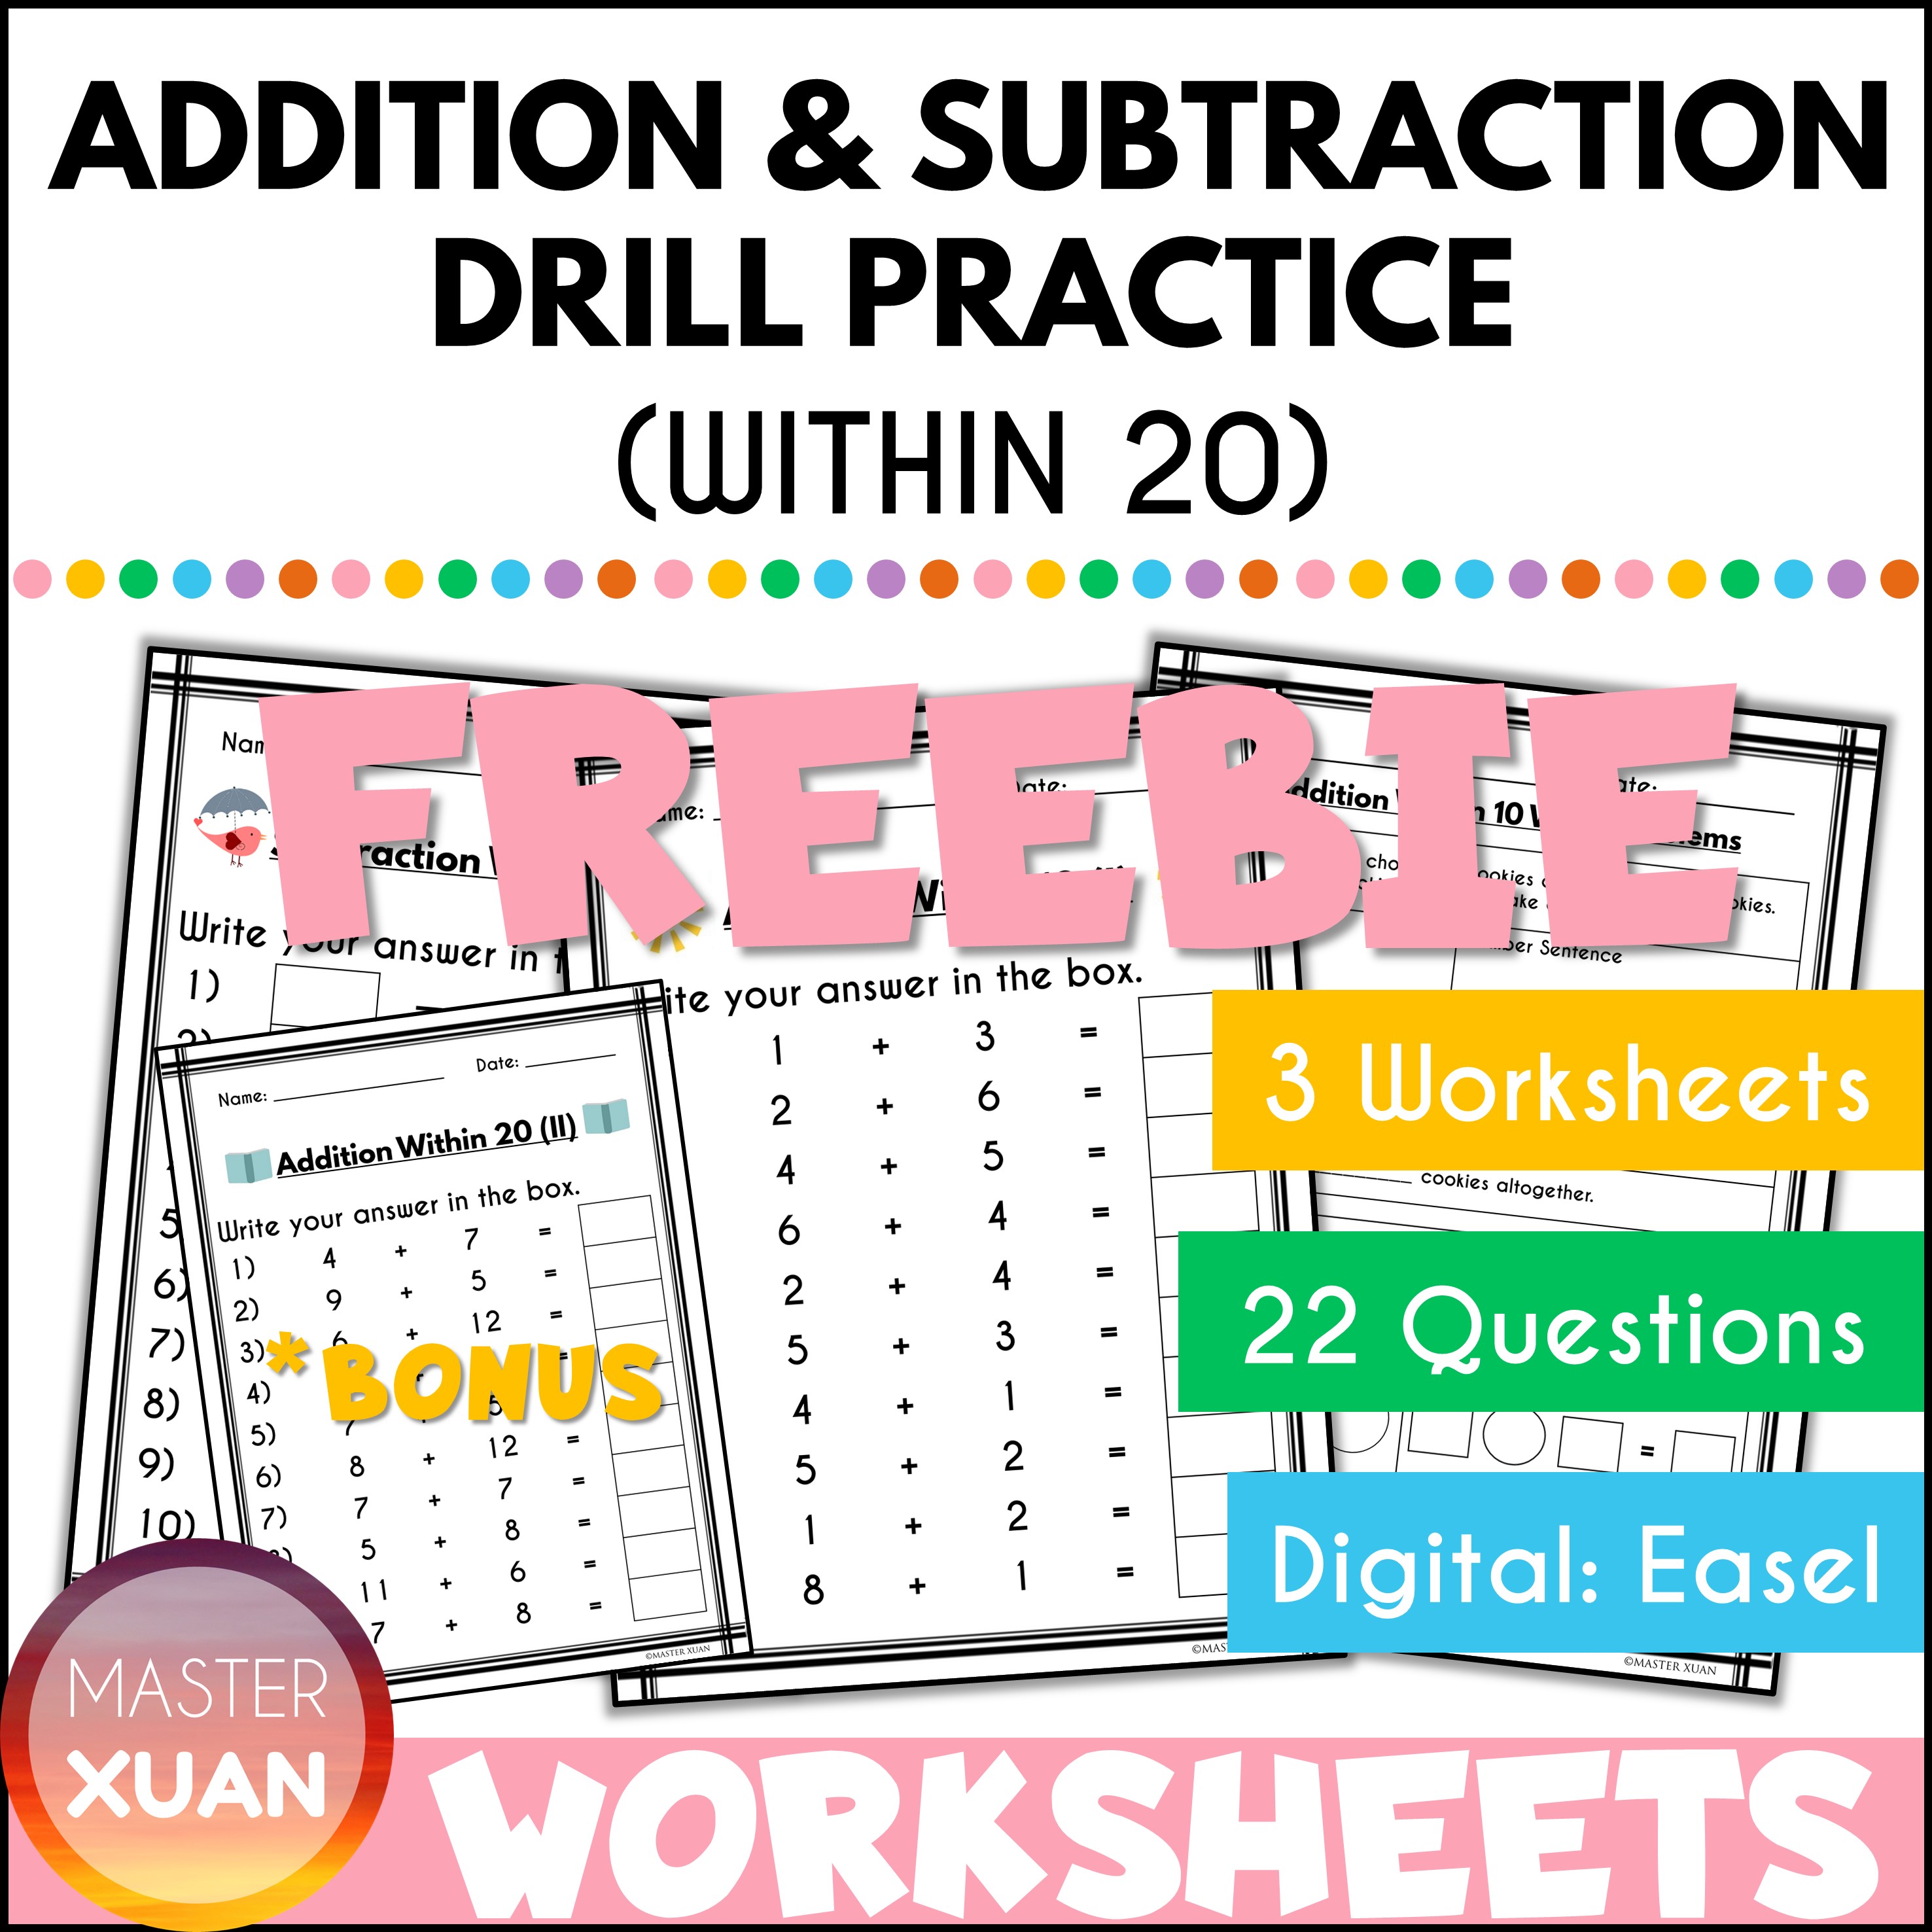 add and subtract within 20 worksheet is available at TPT for free.